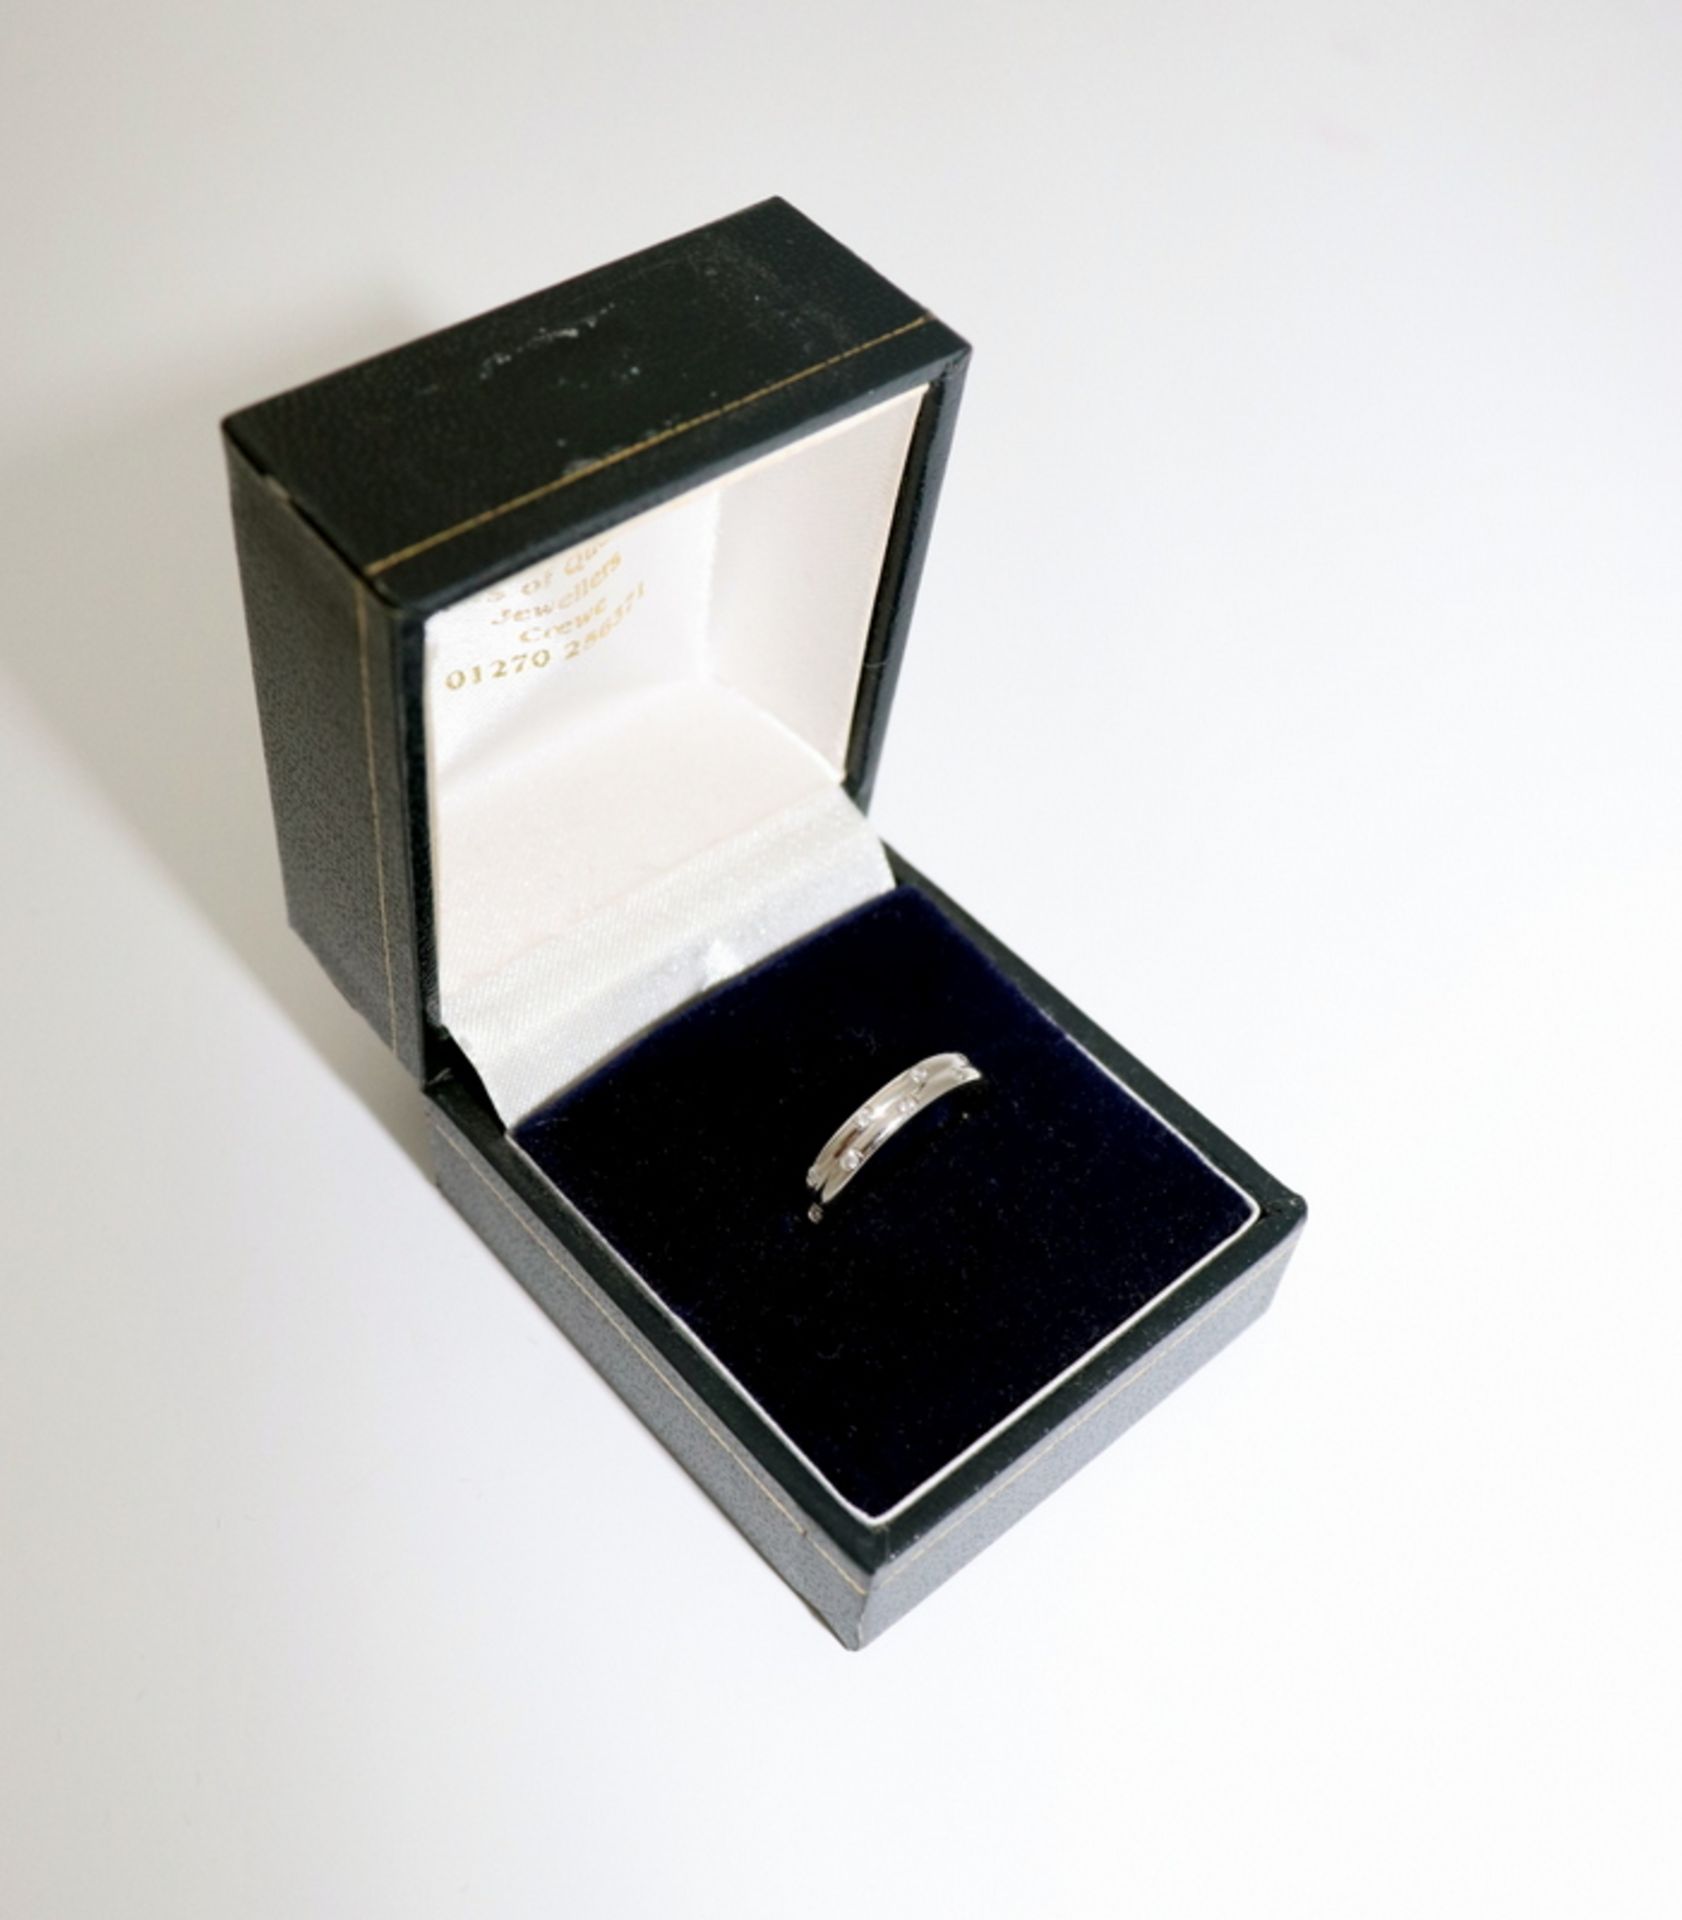 Platinum eternity ring, size l1/2 .14ct Diamond (rrp £450) (Located Stockport – See General Notes - Image 2 of 2